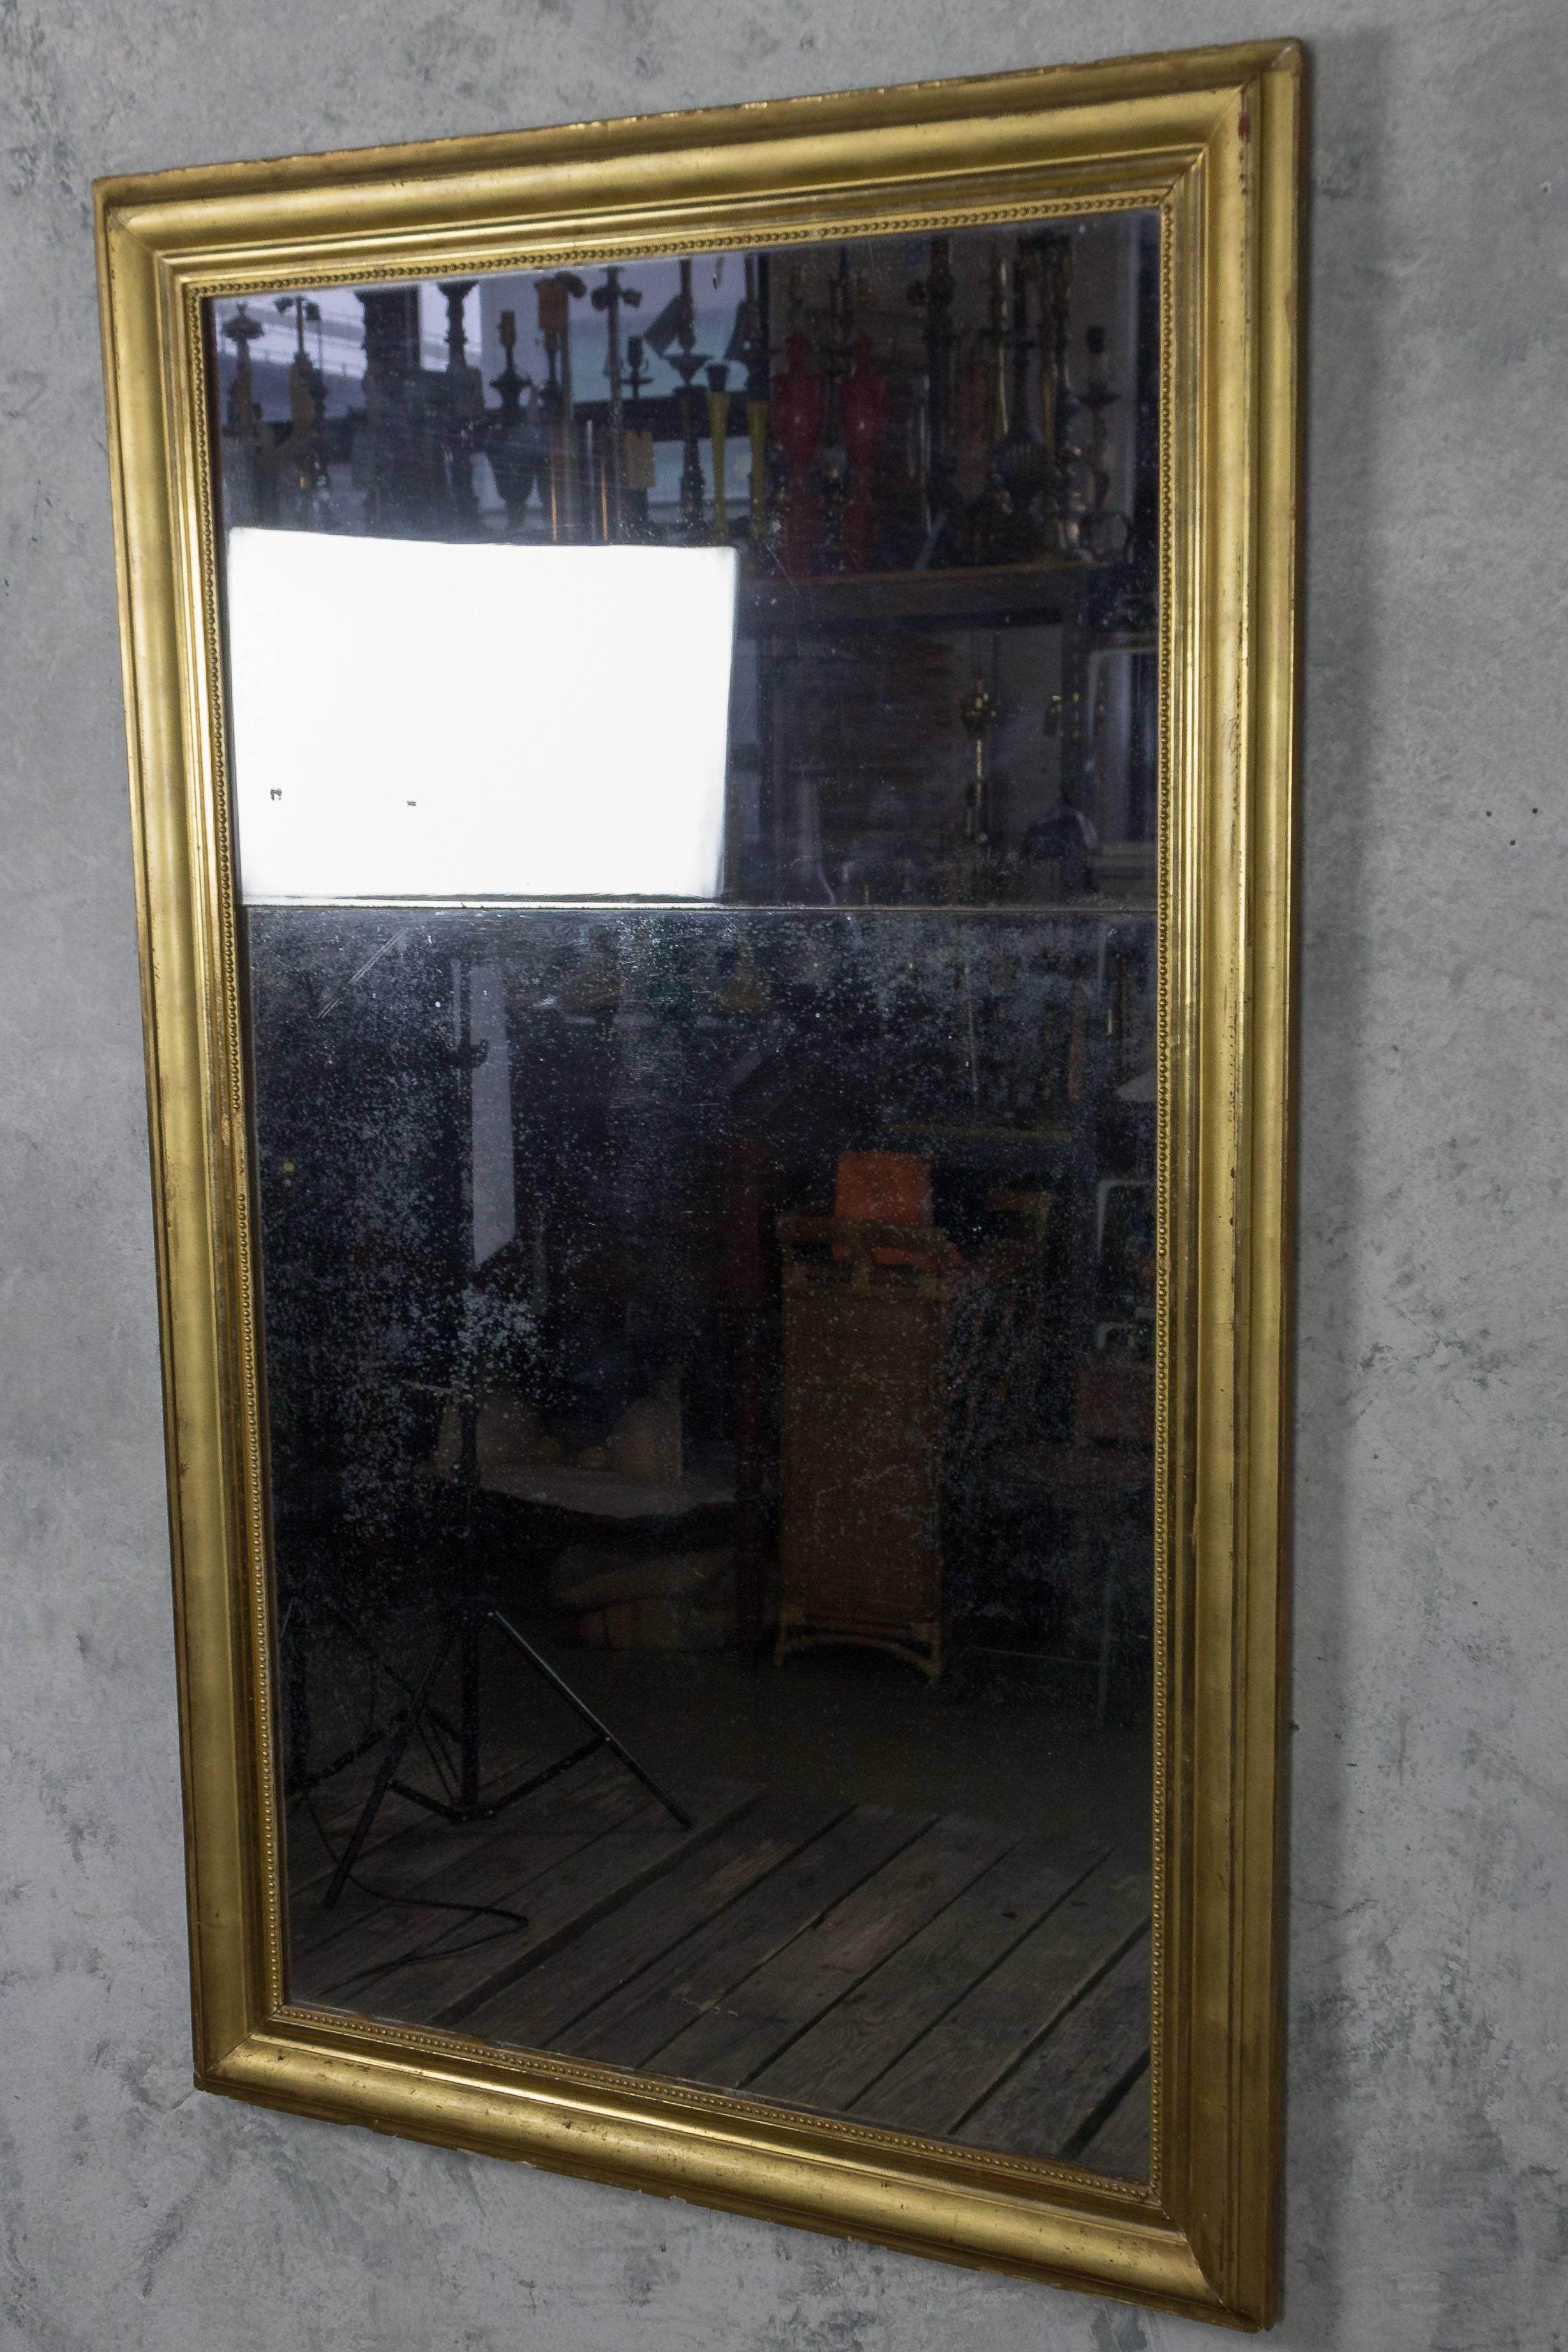 Large French late 18th century stacked mercury mirror in a gilt frame. Good condition, wear appropriate to age.

Ref #: DM1203-33

Dimensions: 63